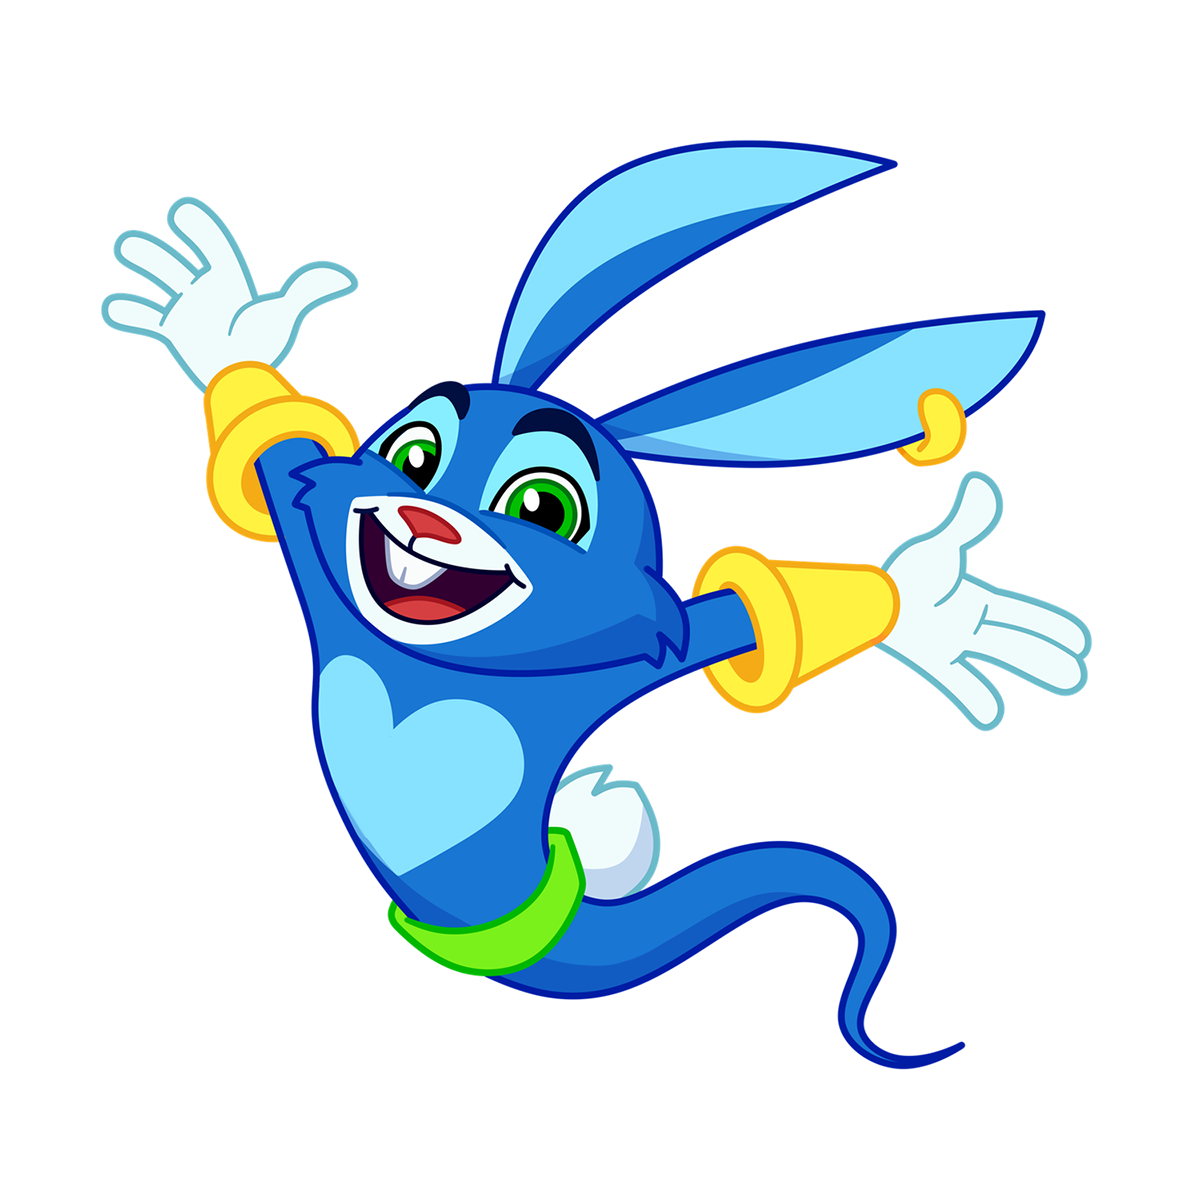 The genie rabbit character smiles happy and waves his arms